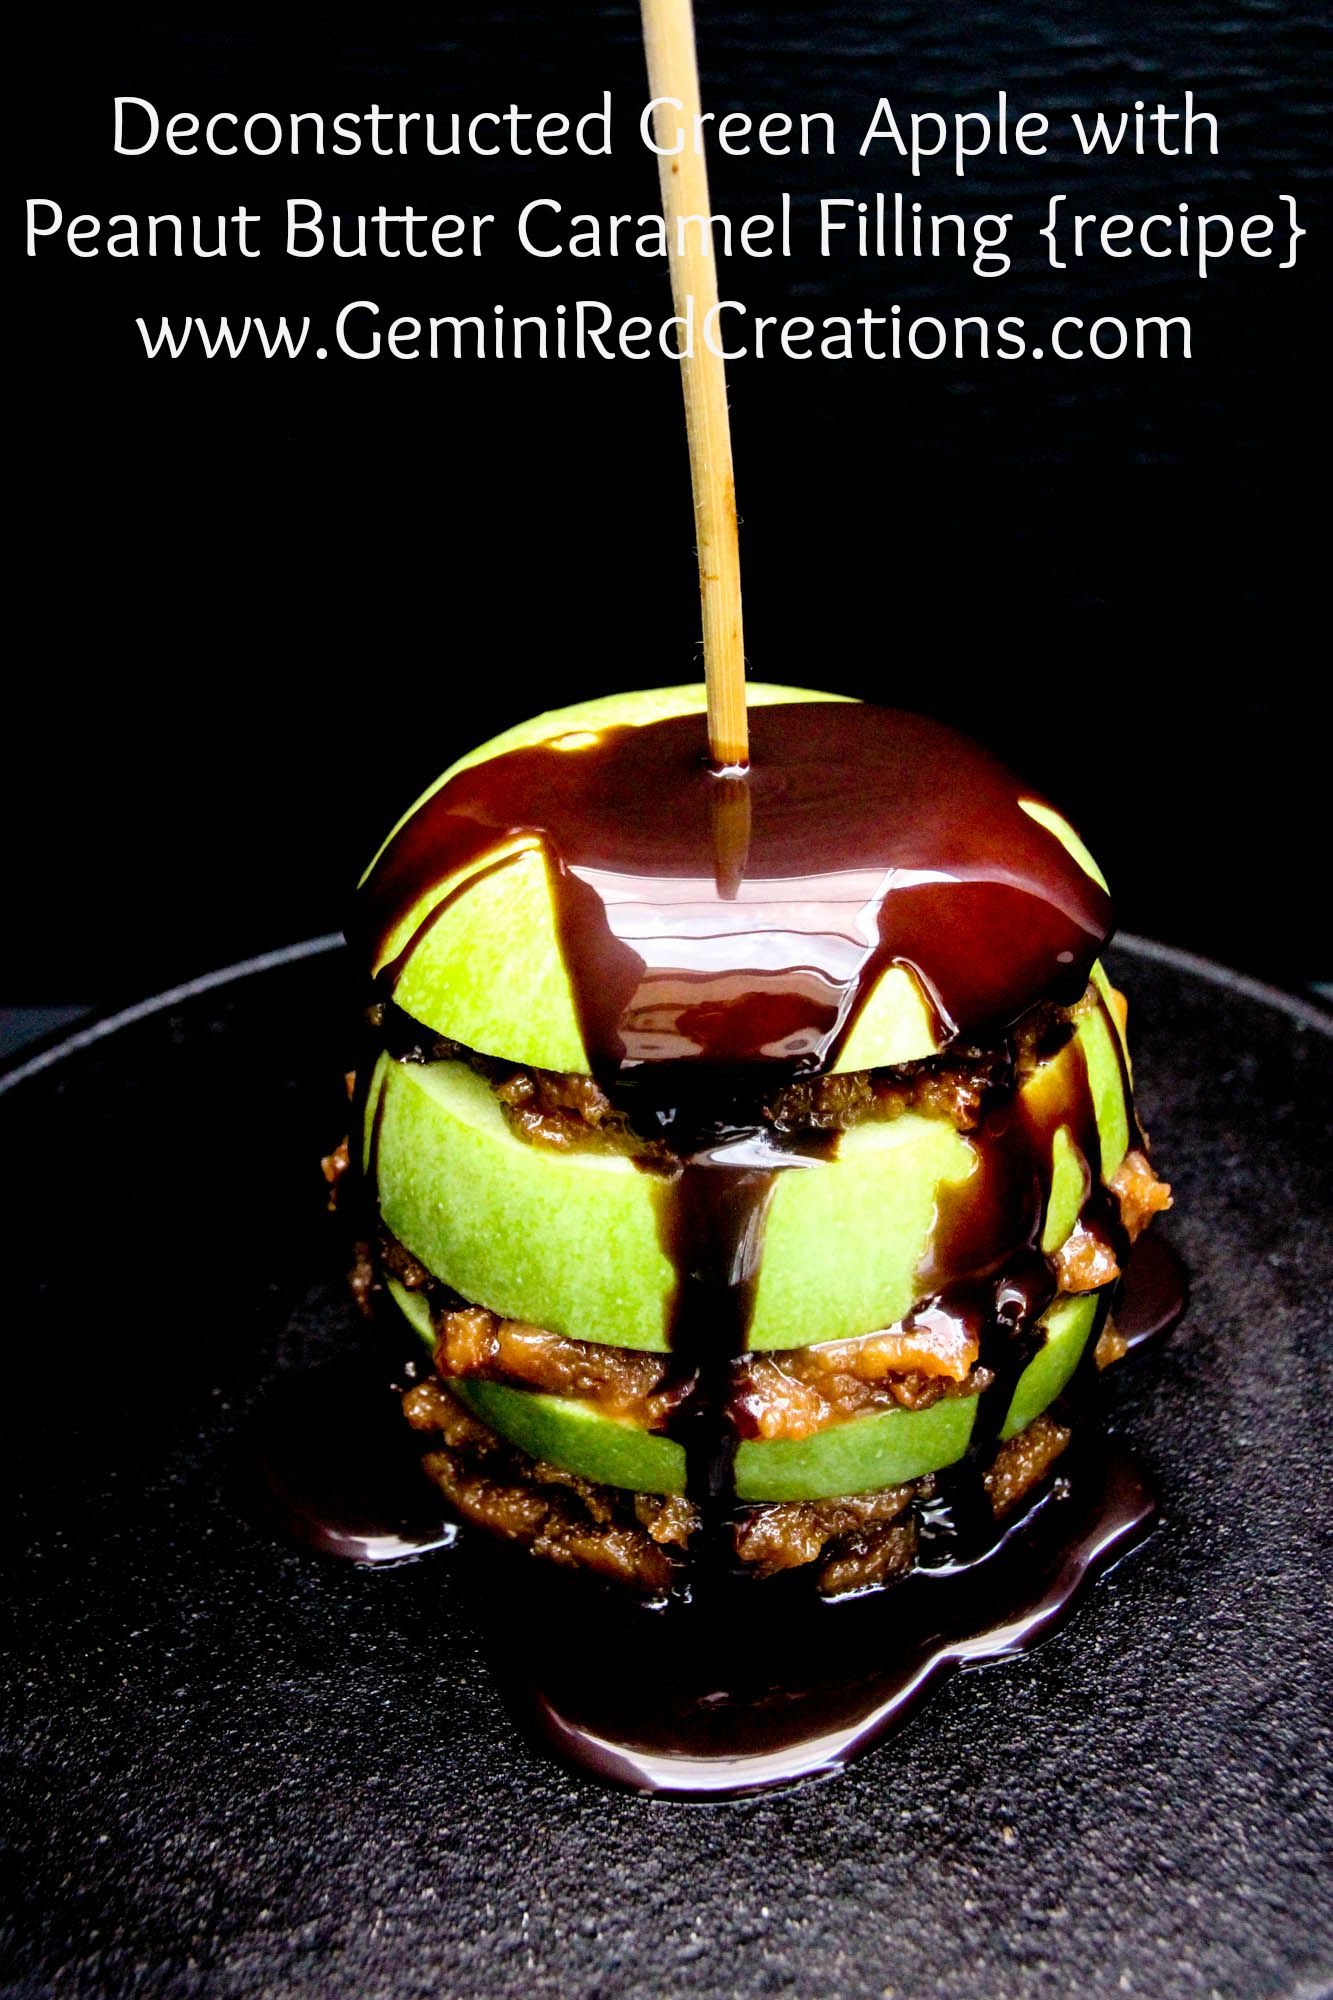 Deconstructed Green Apple with Peanut Butter Caramel Filling {recipe}